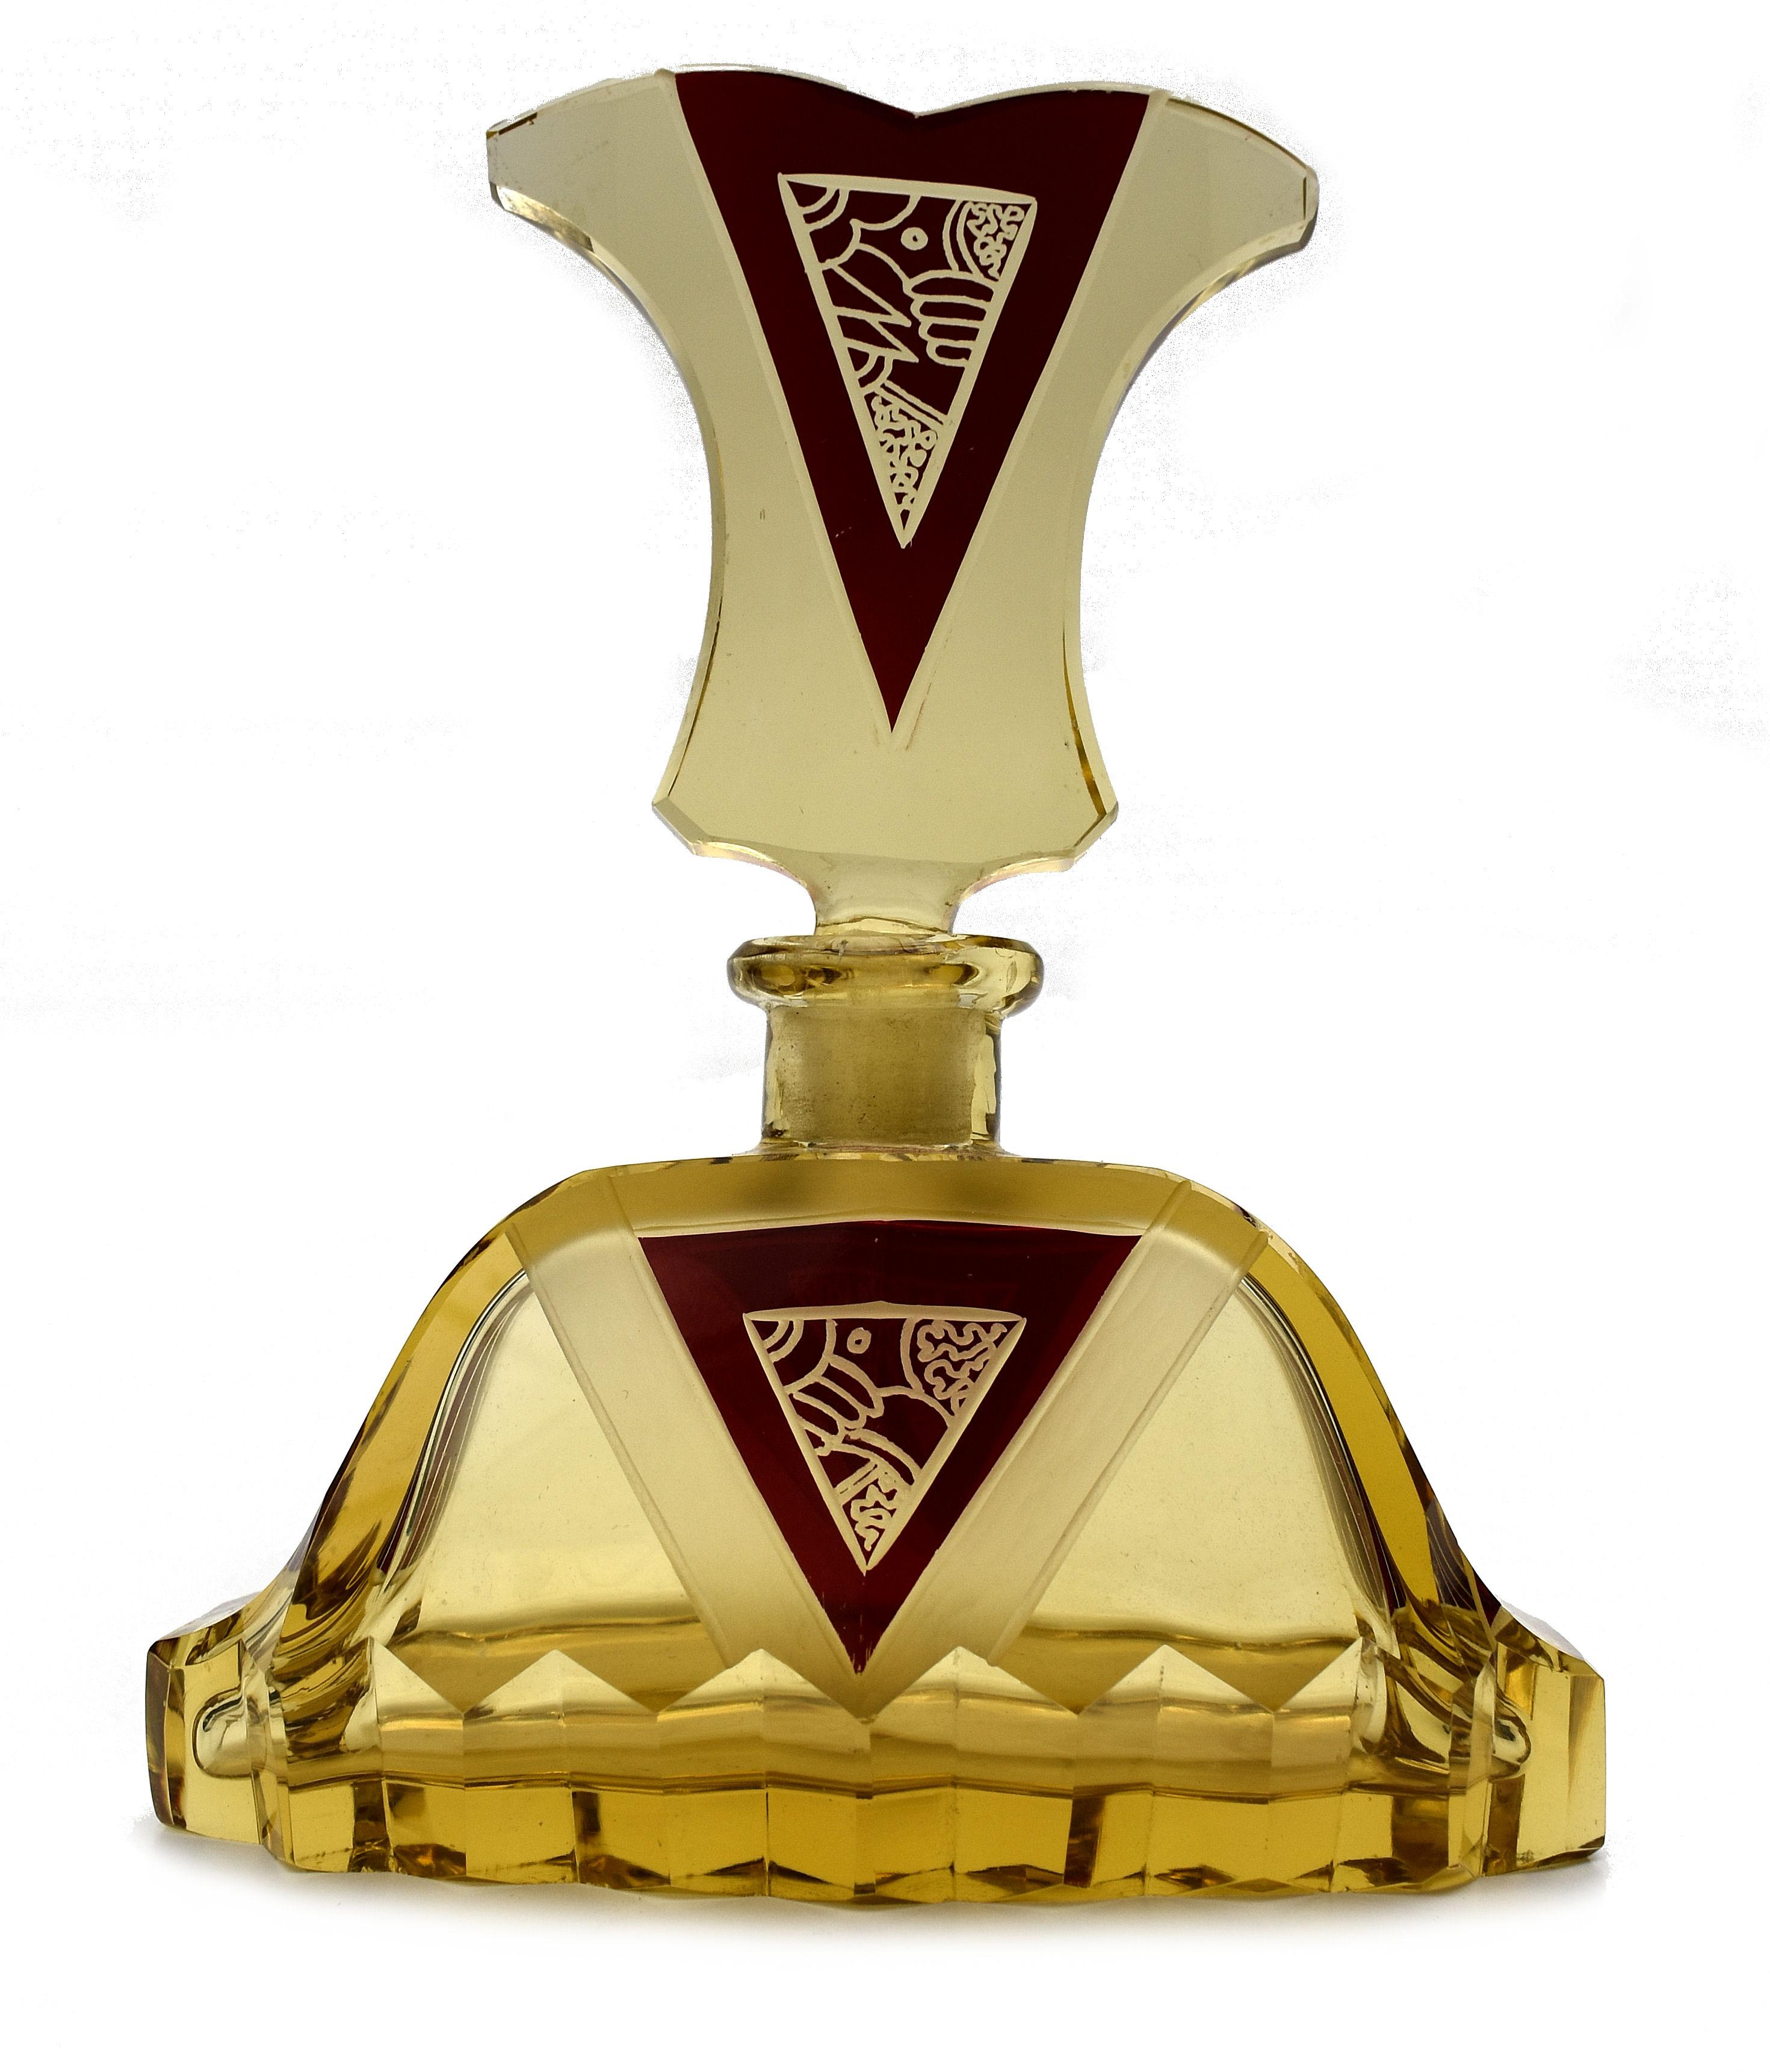 Art Deco Amber Coloured Glass Perfume Bottle by Karl Palda, c1930s For Sale 1